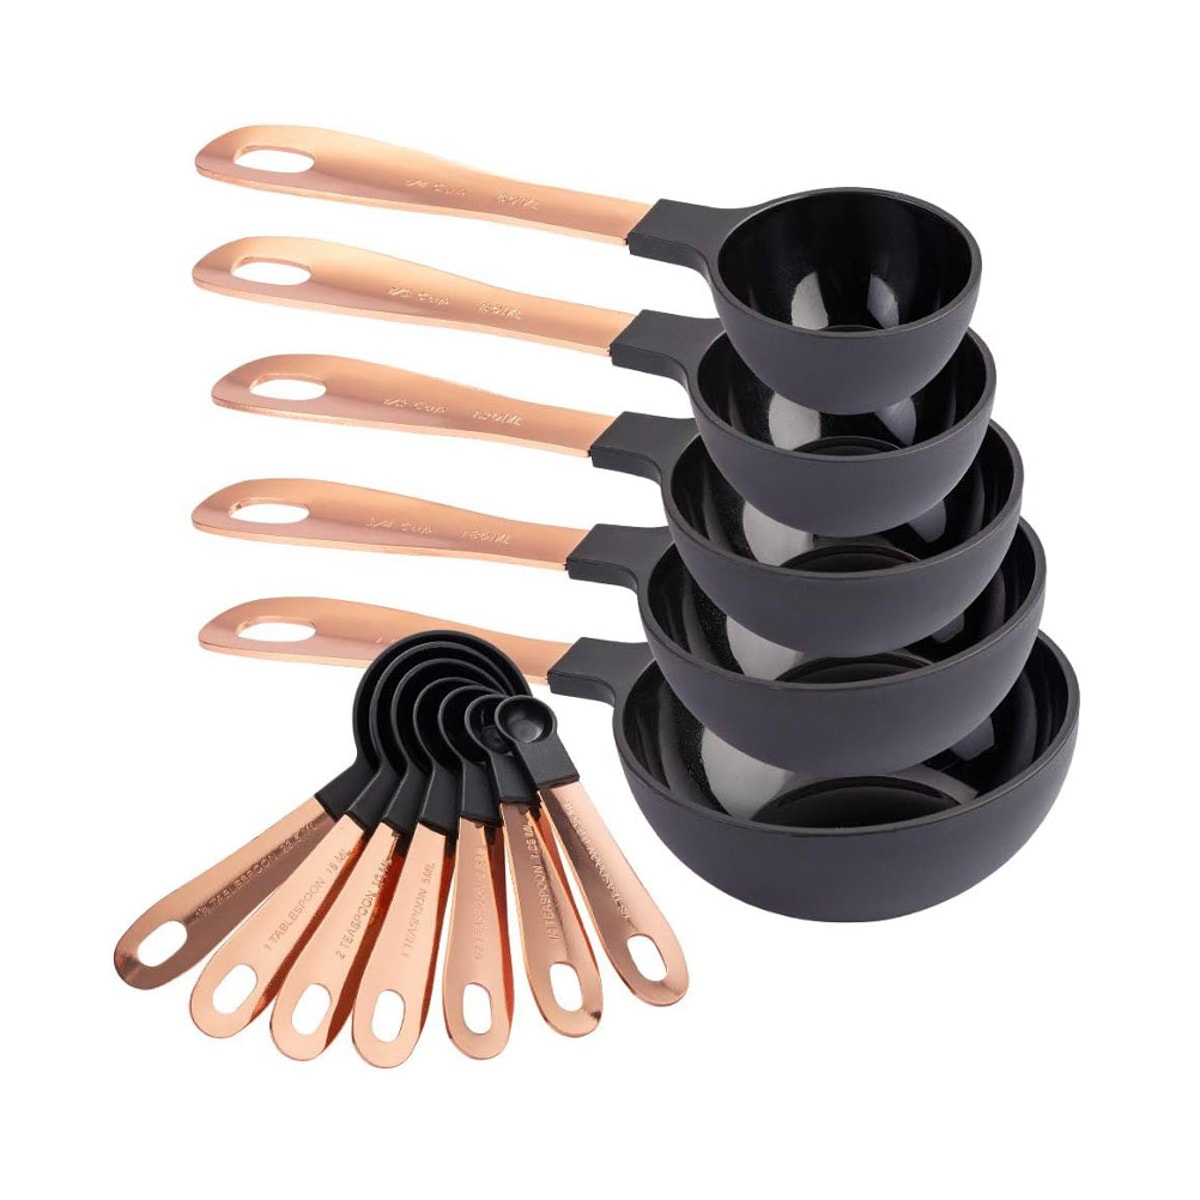 A set of black measuring cups and spoons.